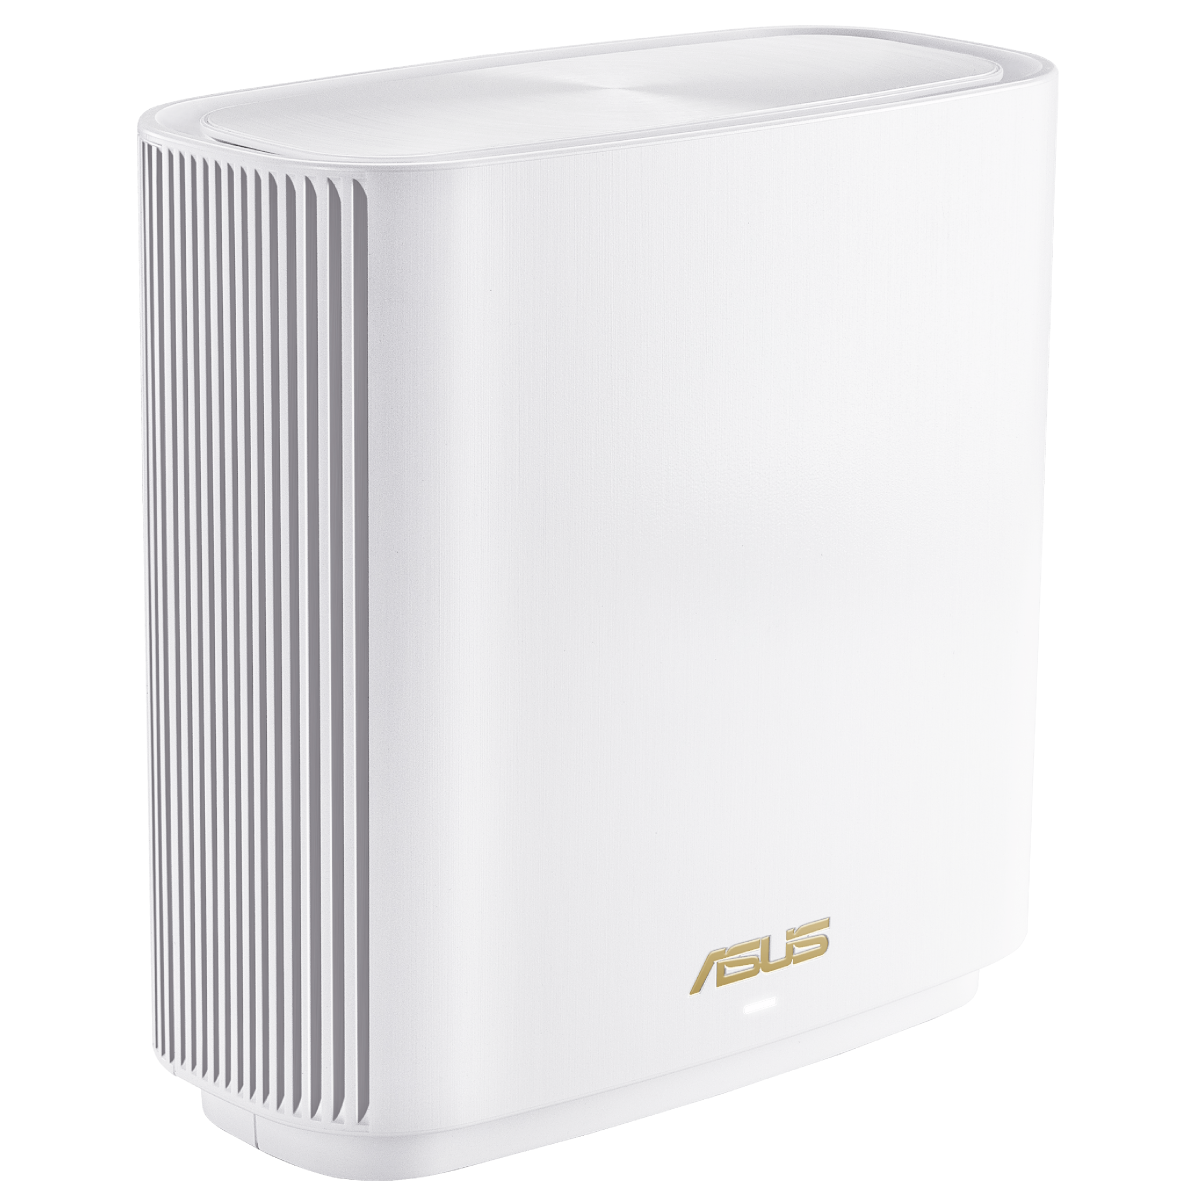 ASUS ZenWifi AX (XT8) AX6600 WiFi 6 Mesh System Pack of 1 - White